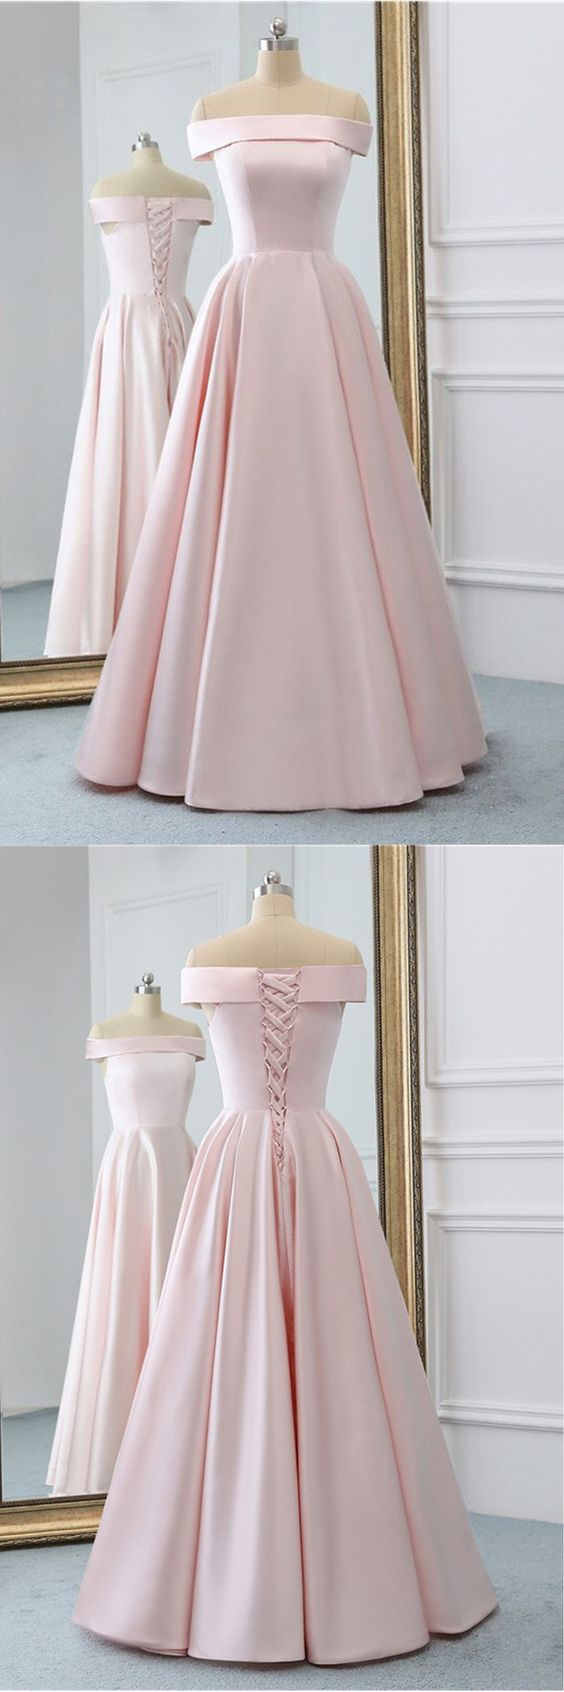 Sexy A Line Light Pink Satin Long Prom Dress Strapless Prom Party Gowns,plus Size Evening Dress